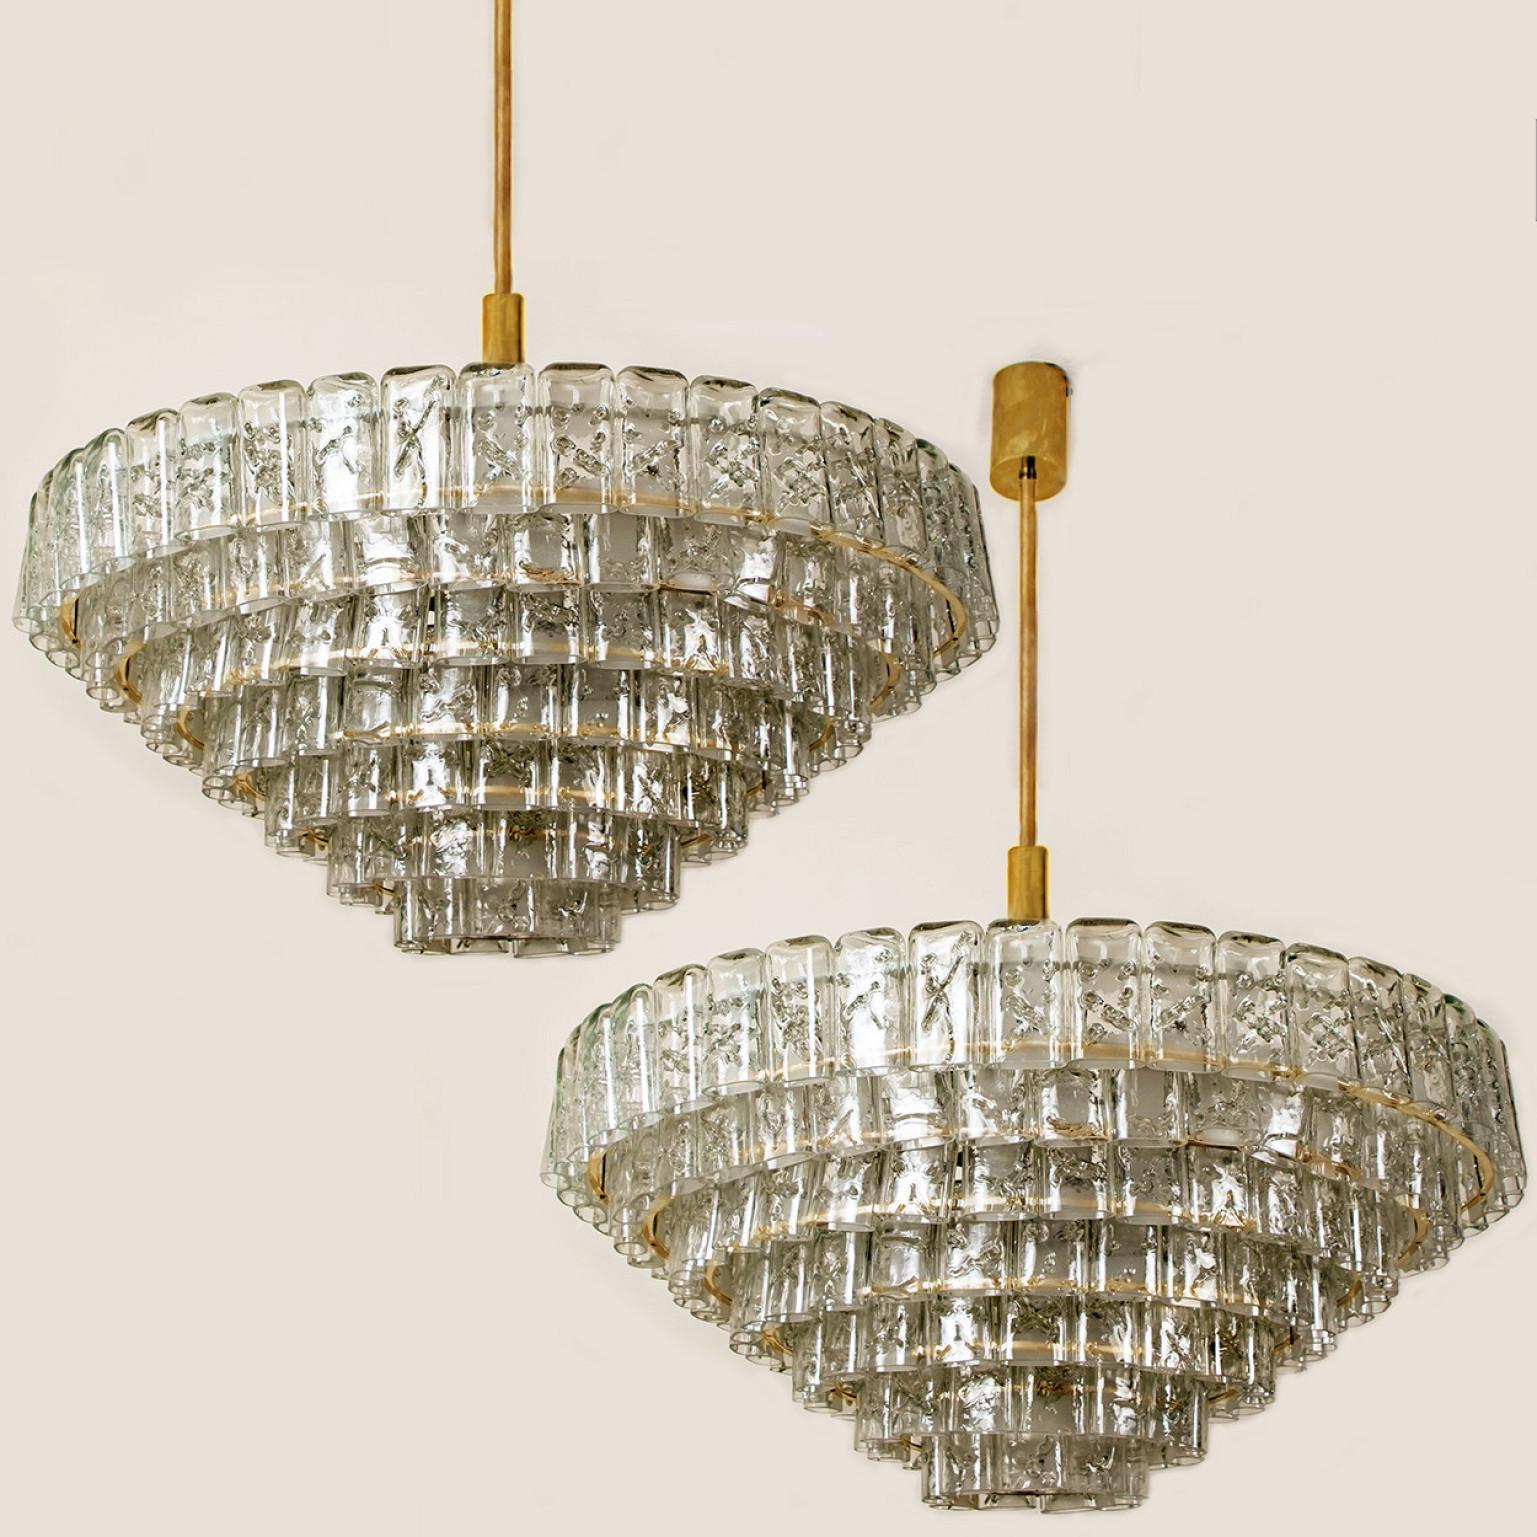 We ofer a amazing high-end light fixture. The pair is executed to a high standard. Beautiful craftsmanship. The light fixture not only functions as light source but also as a sculptural component.

The stylish and clean elegance of this chandelier